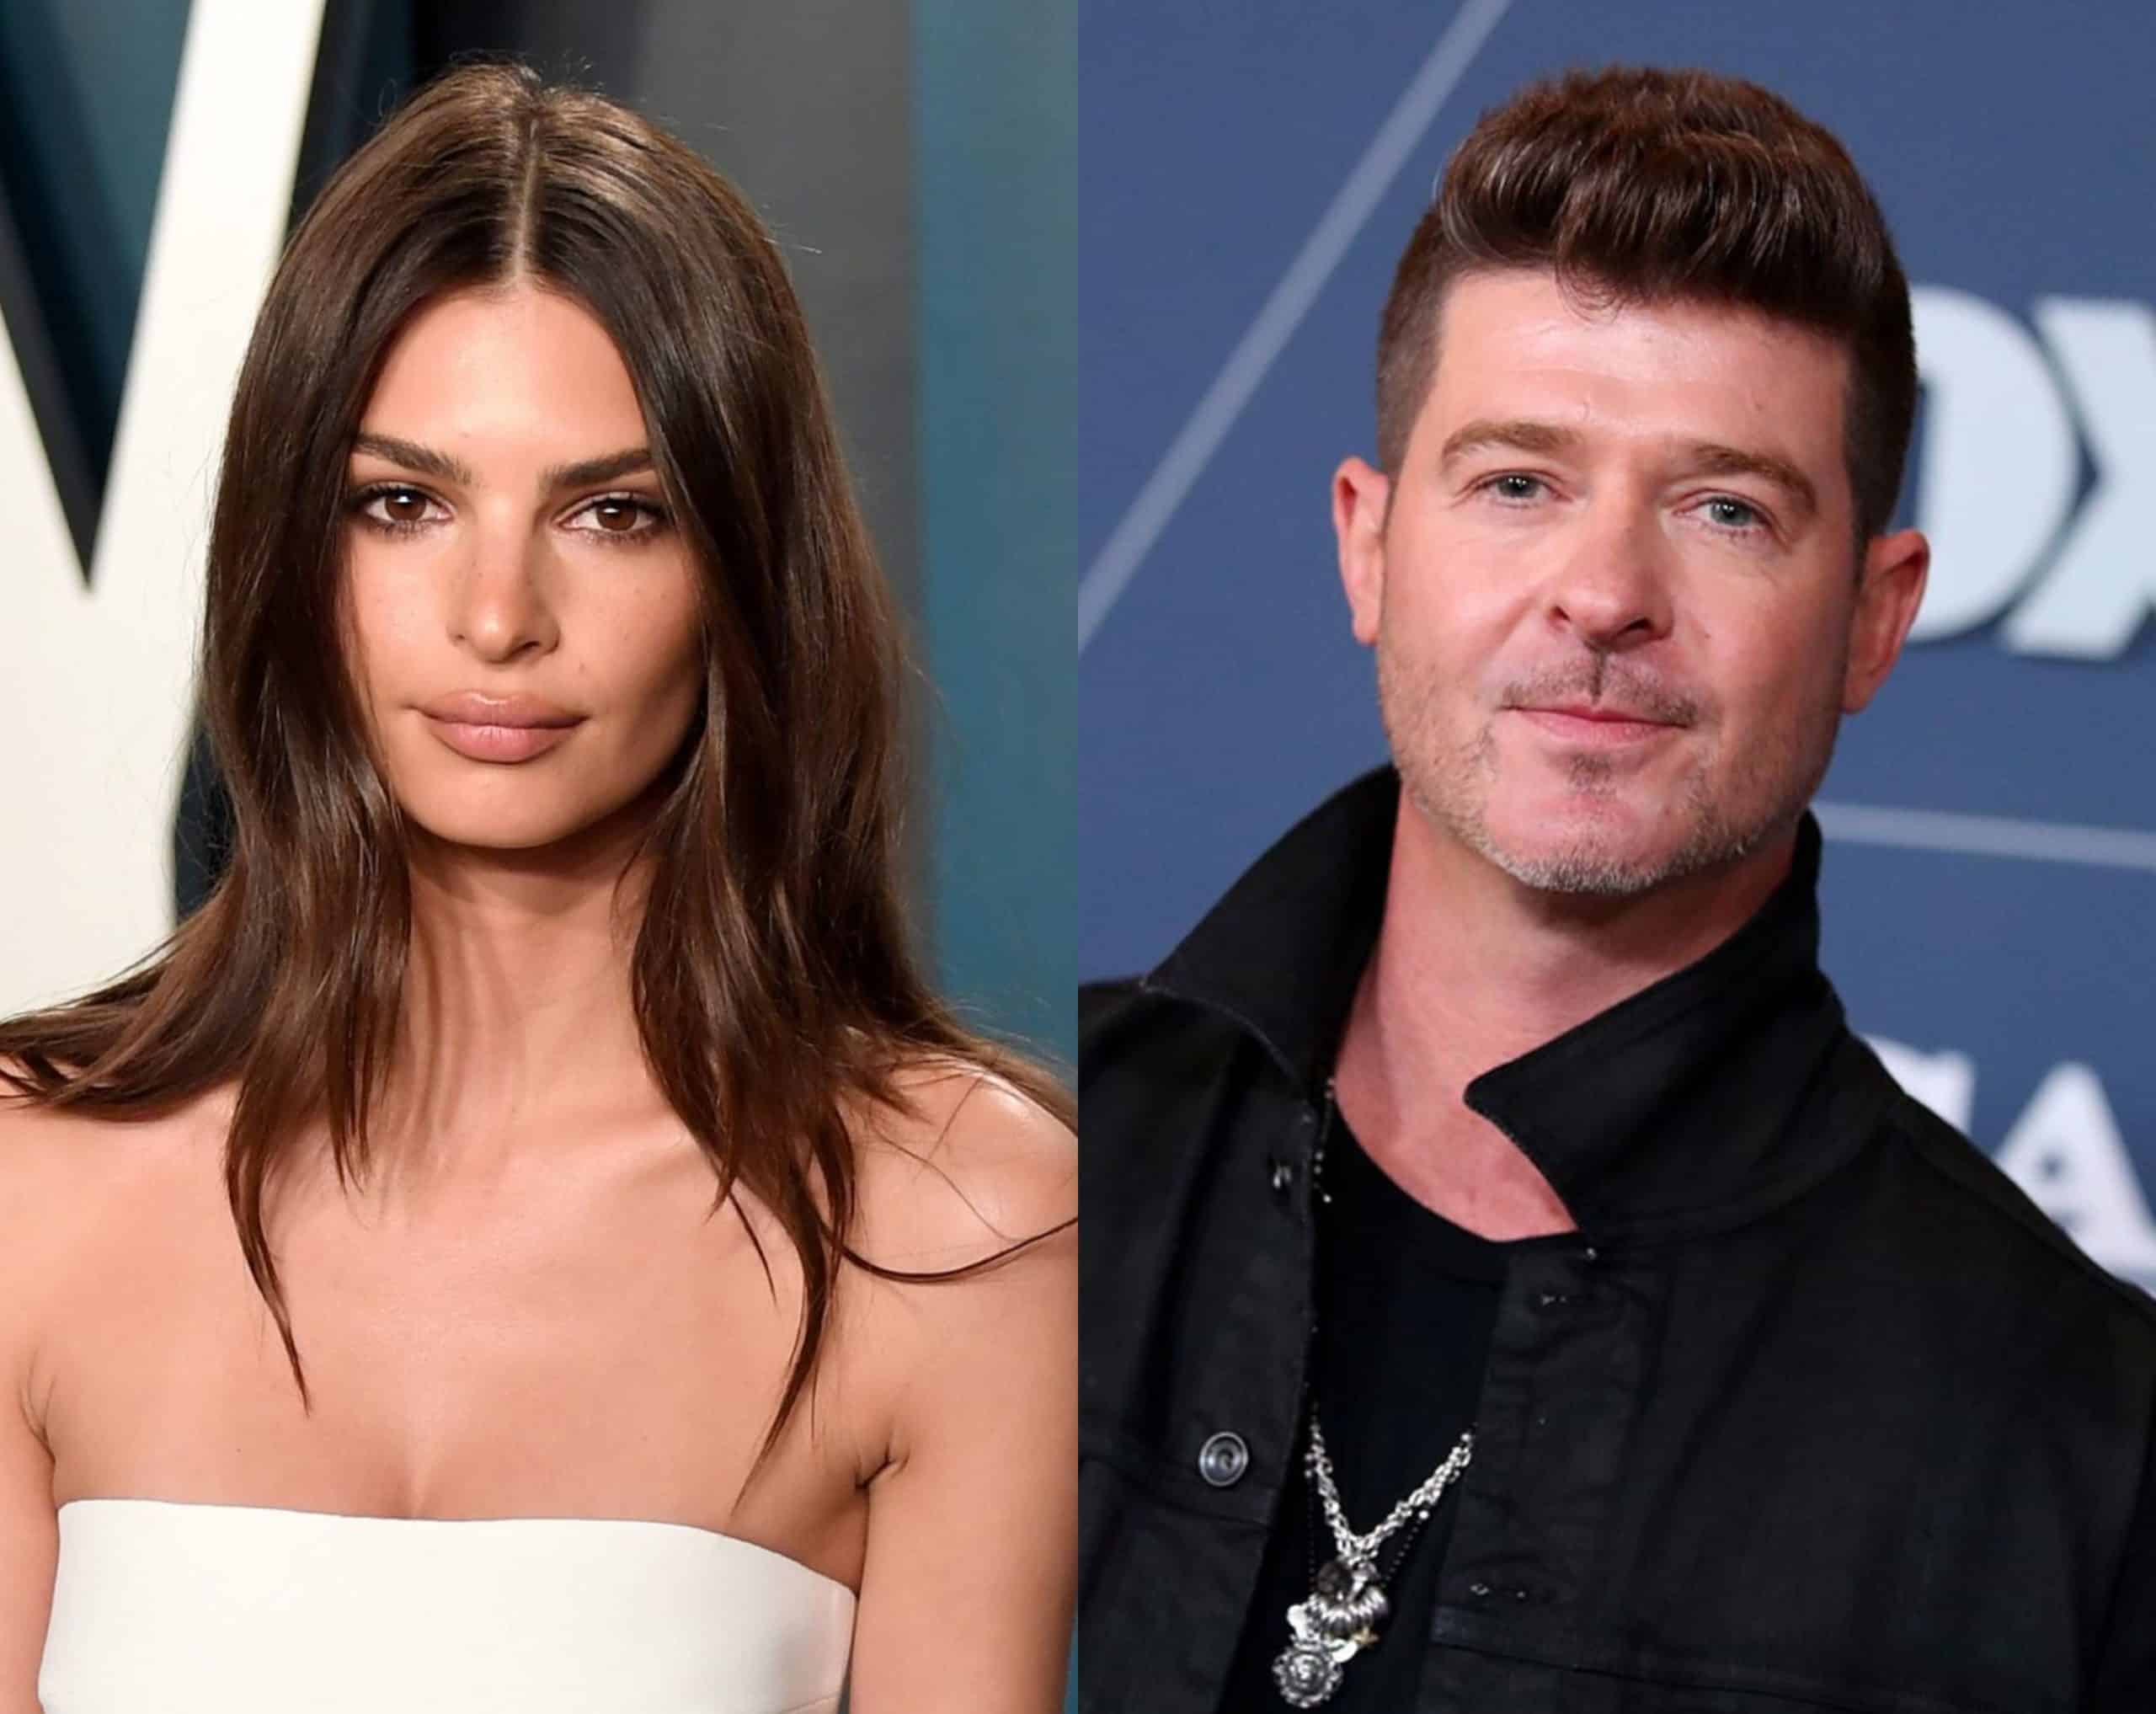 Emily Ratajkowski Reveals Robin Thicke Groped Her During Blurred Lines Video Shoot